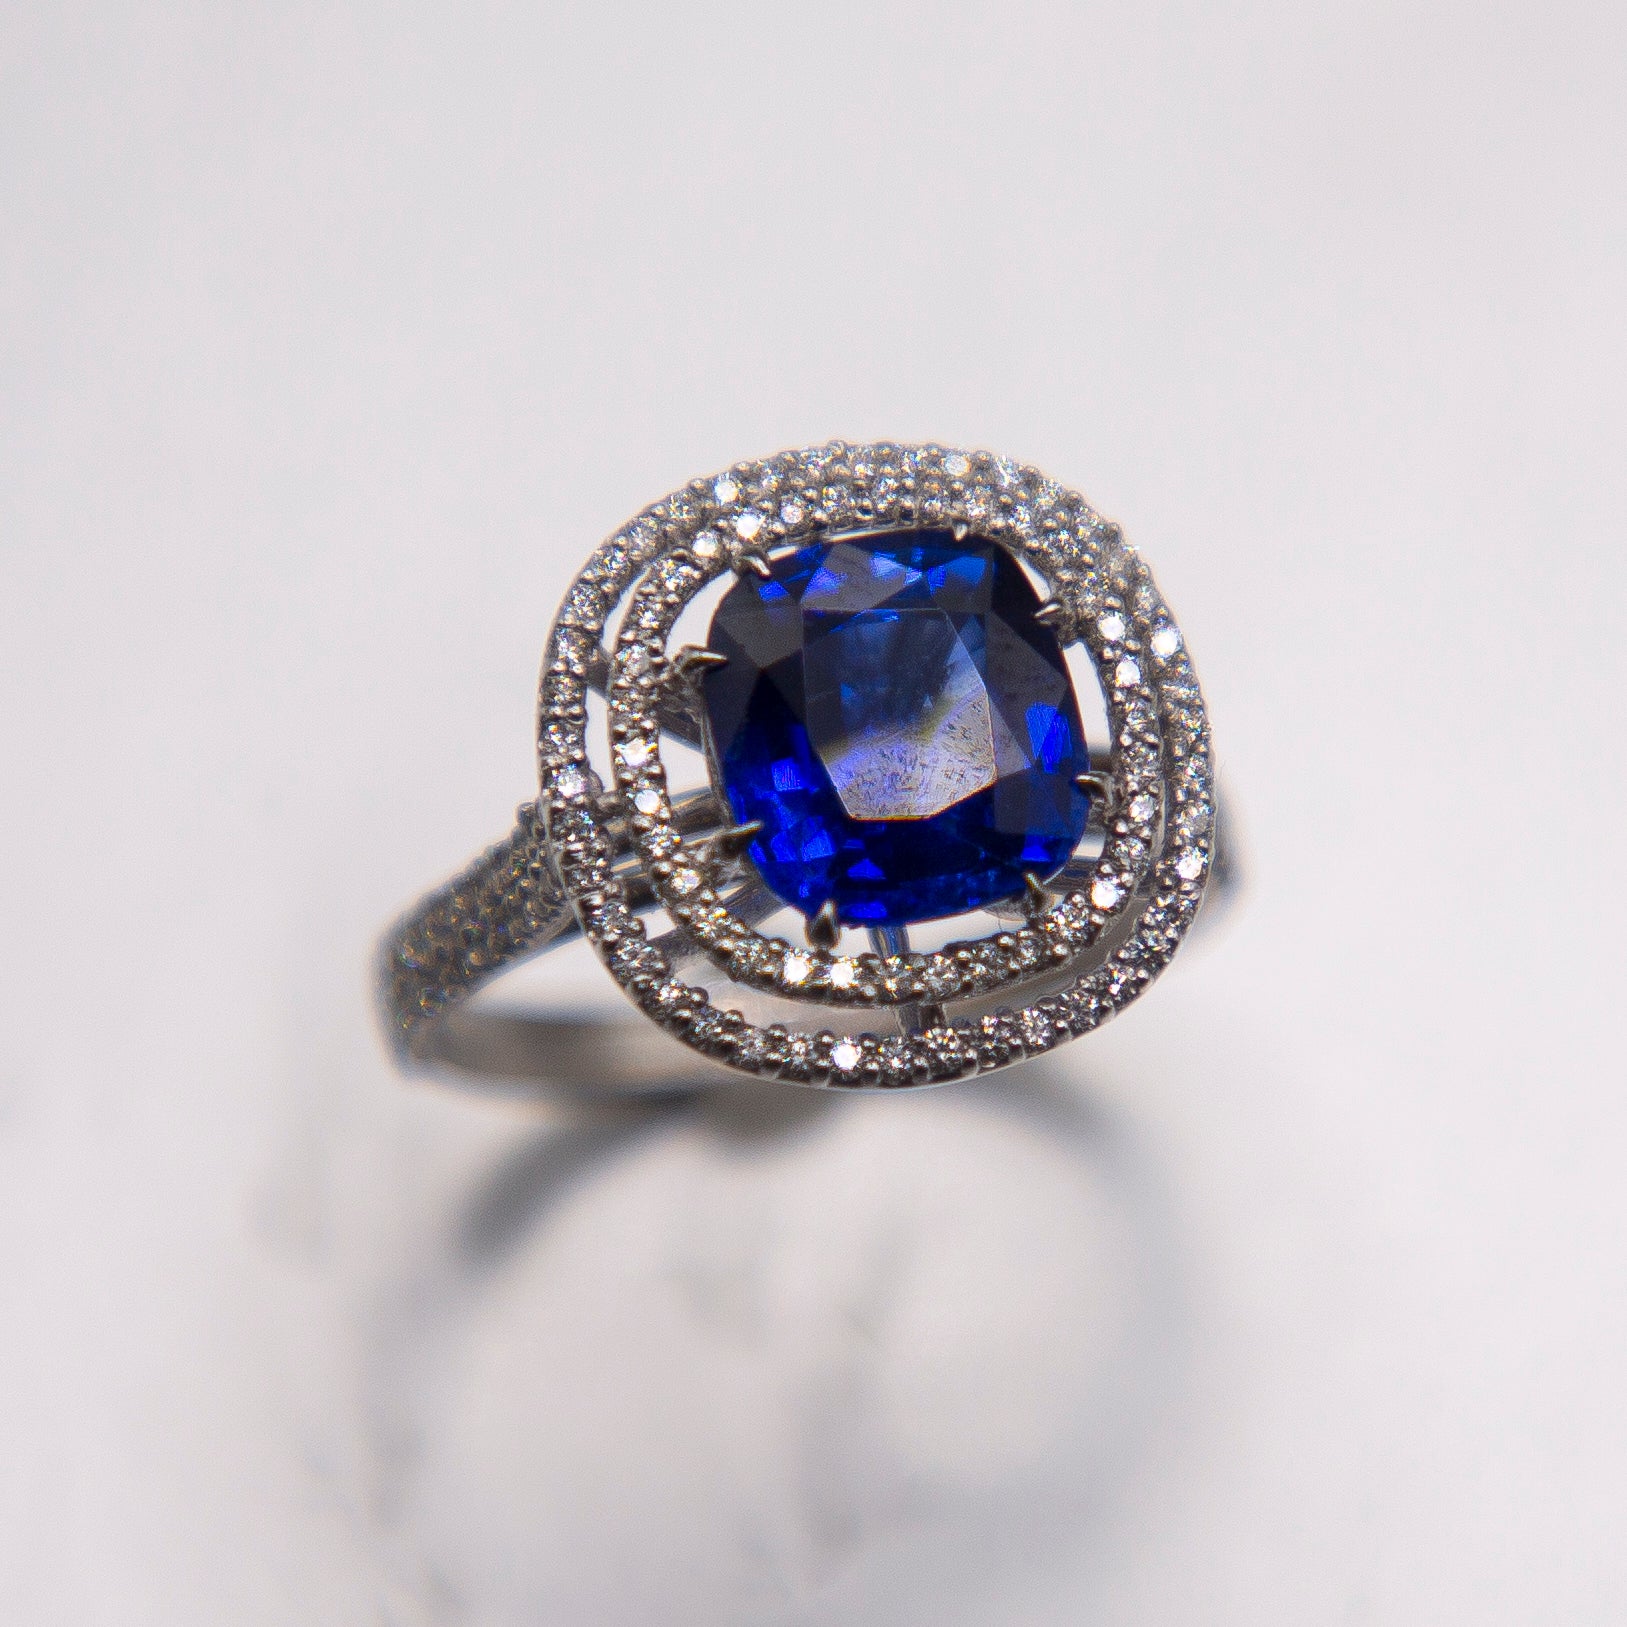 18k White Gold Halo/ Intense Blue Sapphire 6.39 Carats/ 132 Diamonds 0.66 Cts For Sale